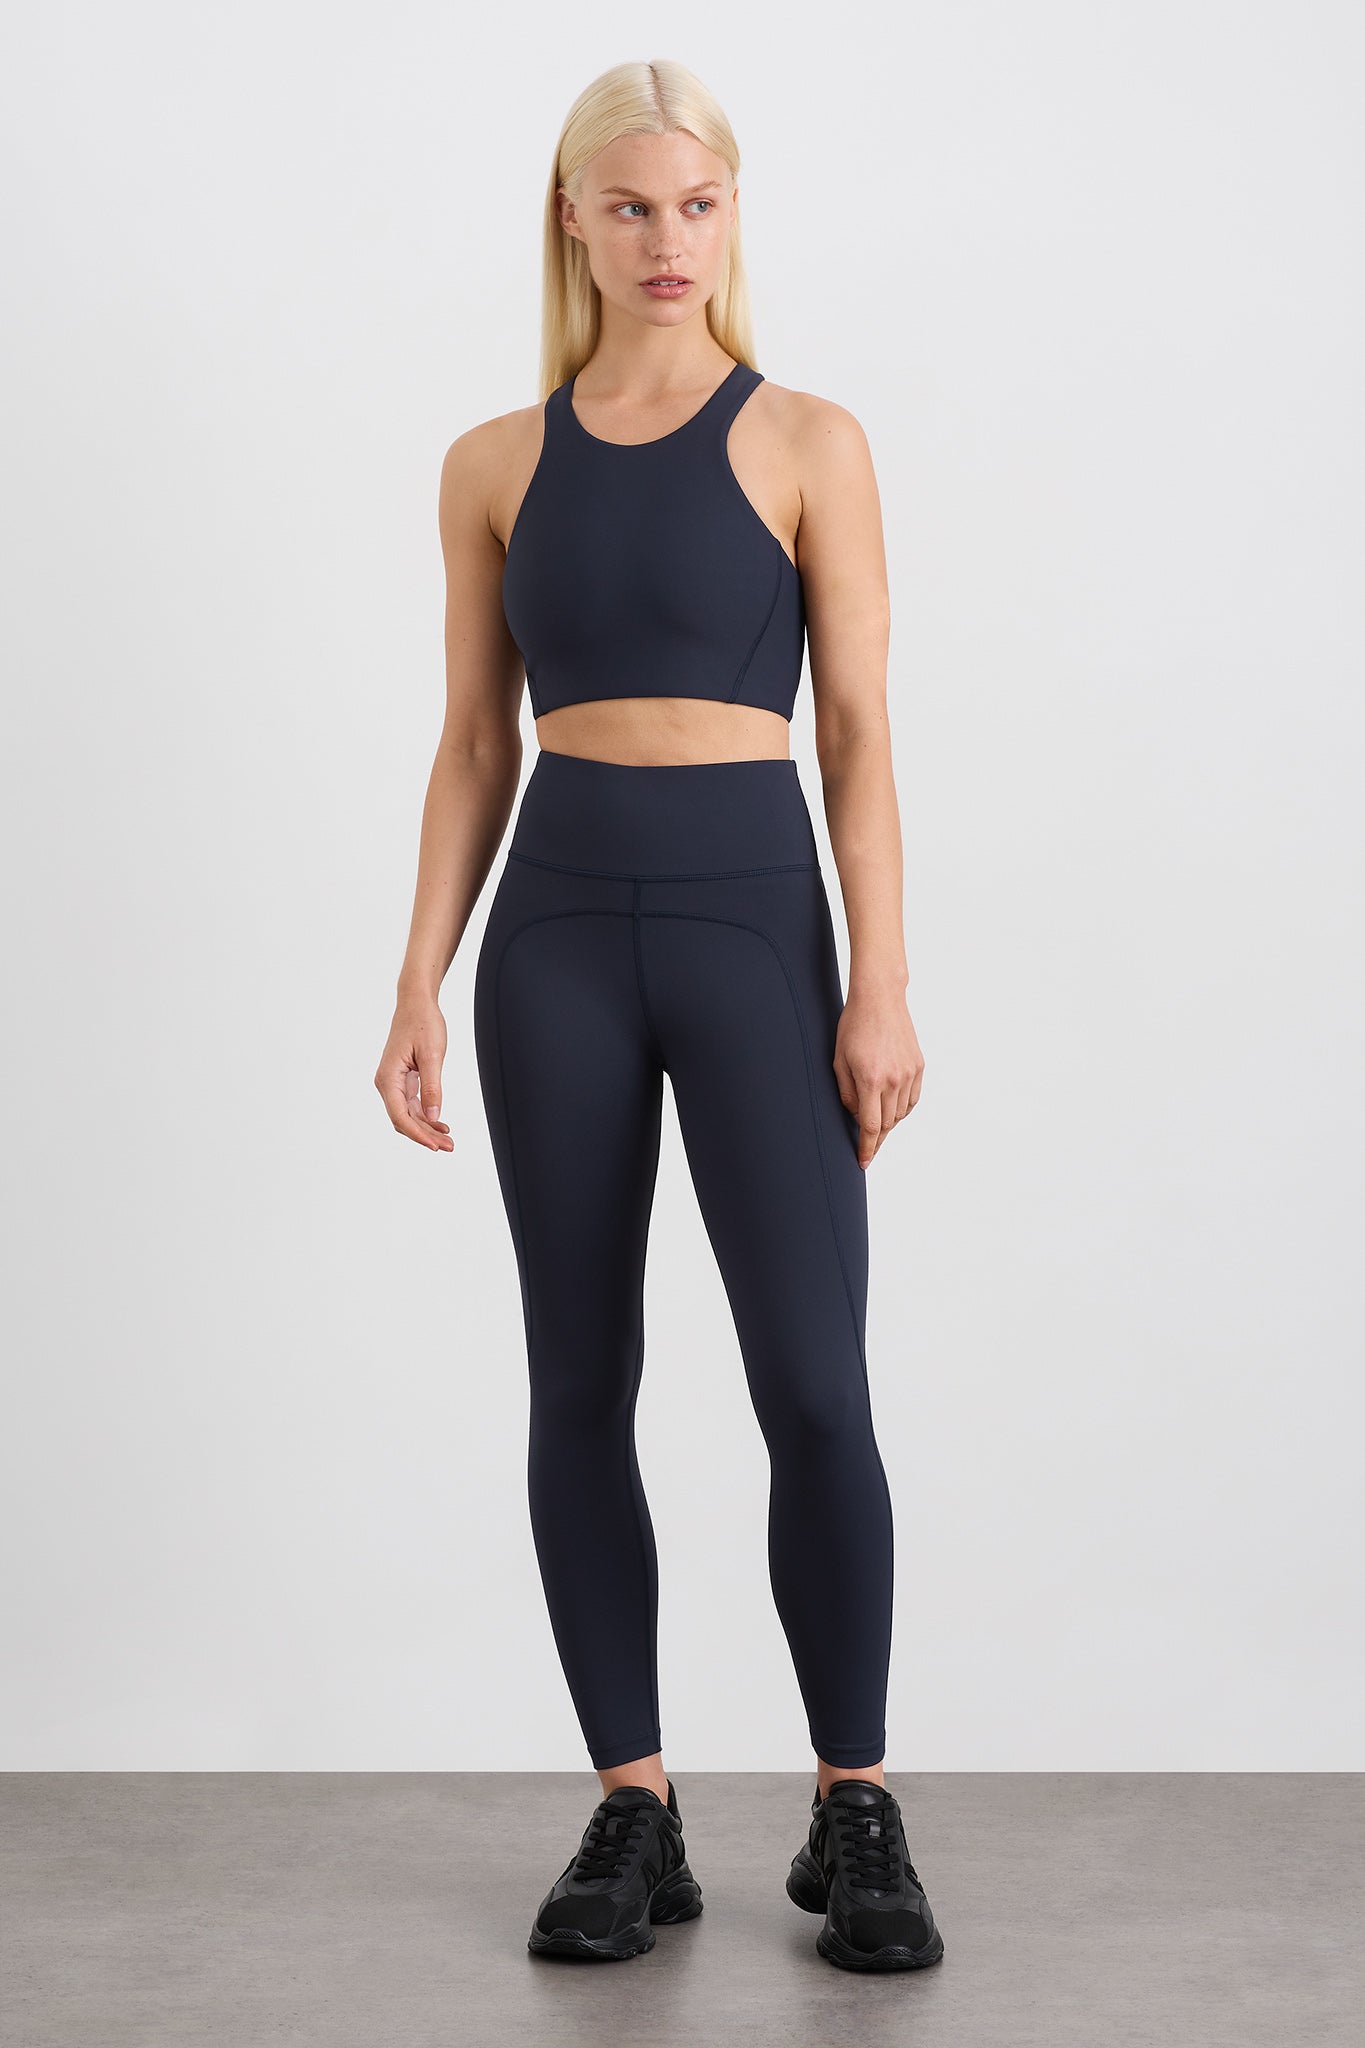 High-Rise Ankle-Length Double Black Diamond Leggings | Free People |  Movement fitness, Fp movement, Casual bottoms